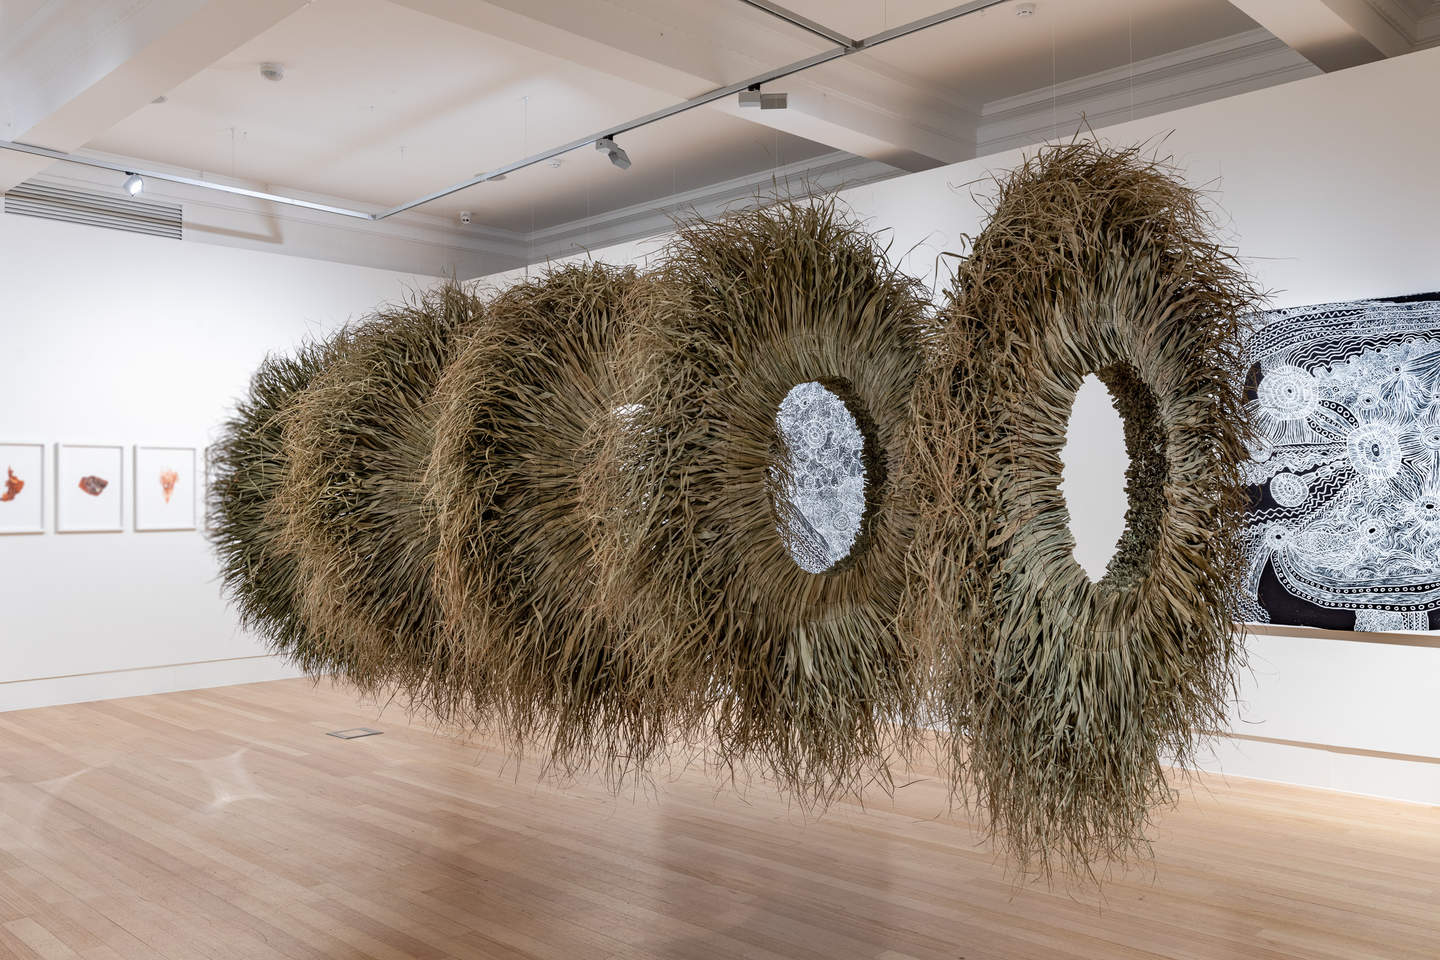 Five suspended circular wreaths made from green organic matter resembling long grass, aligned to create a cylinder.  